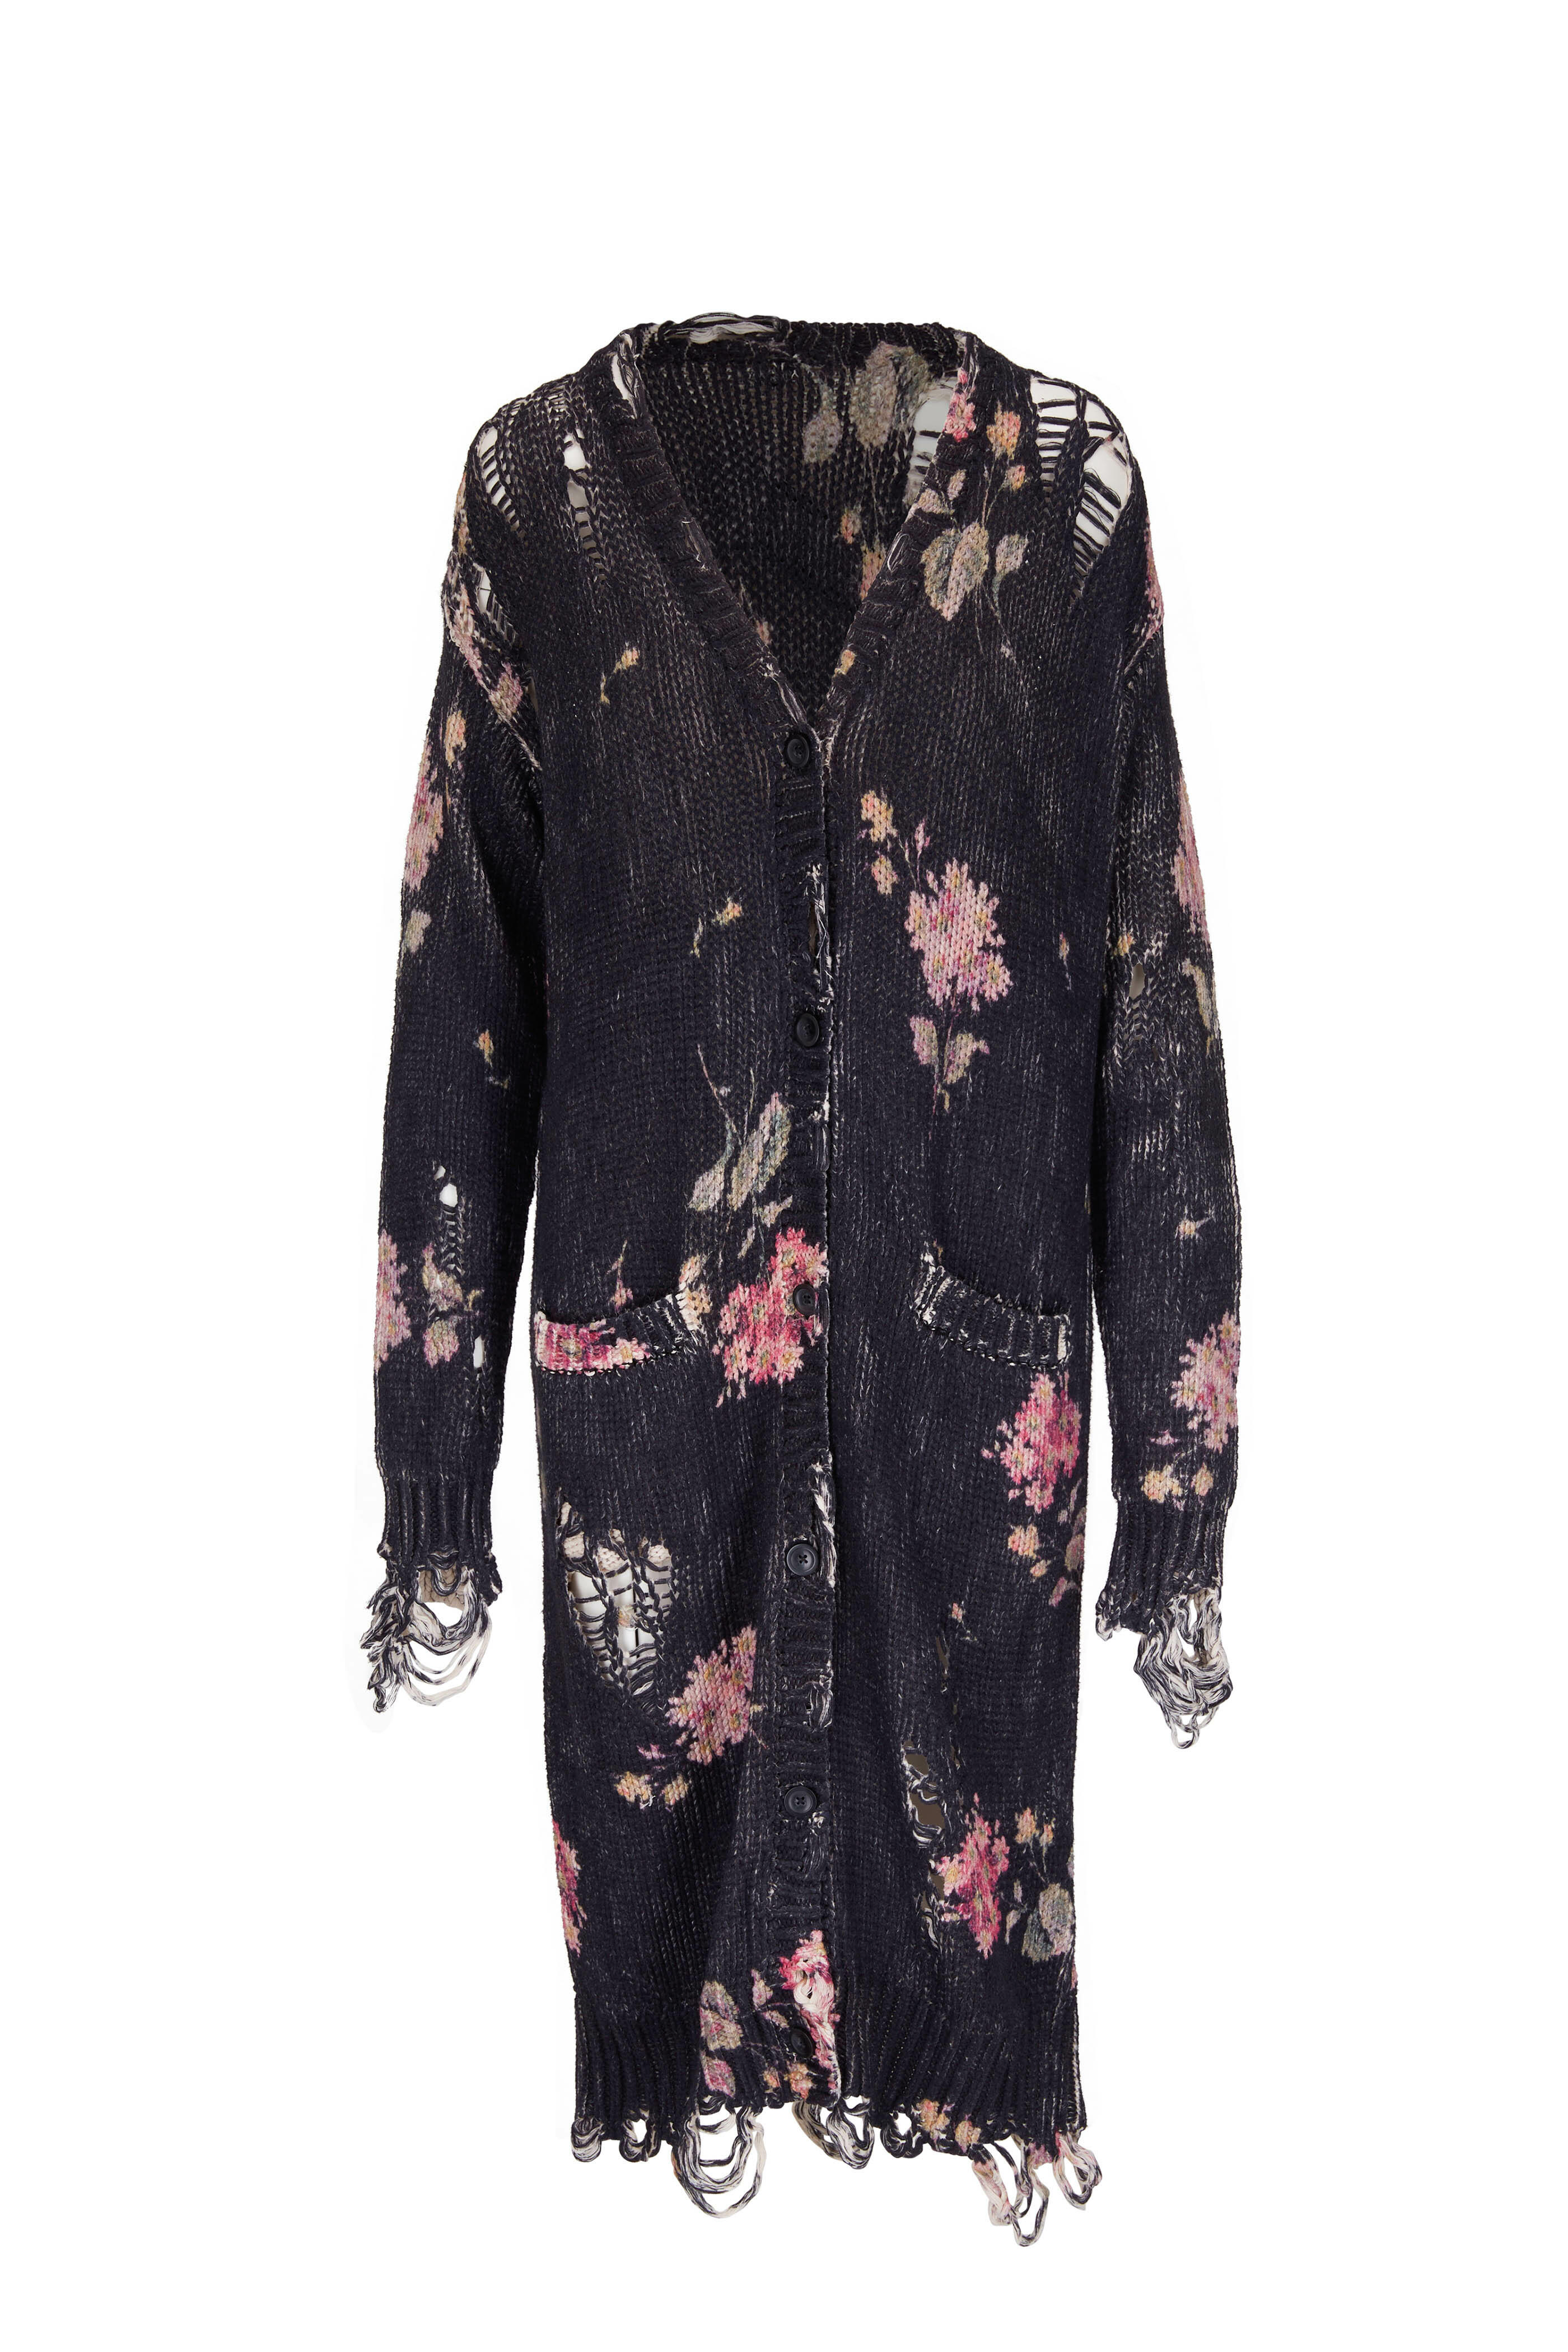 R13 - Black Floral Distressed Long Cardigan | Mitchell Stores